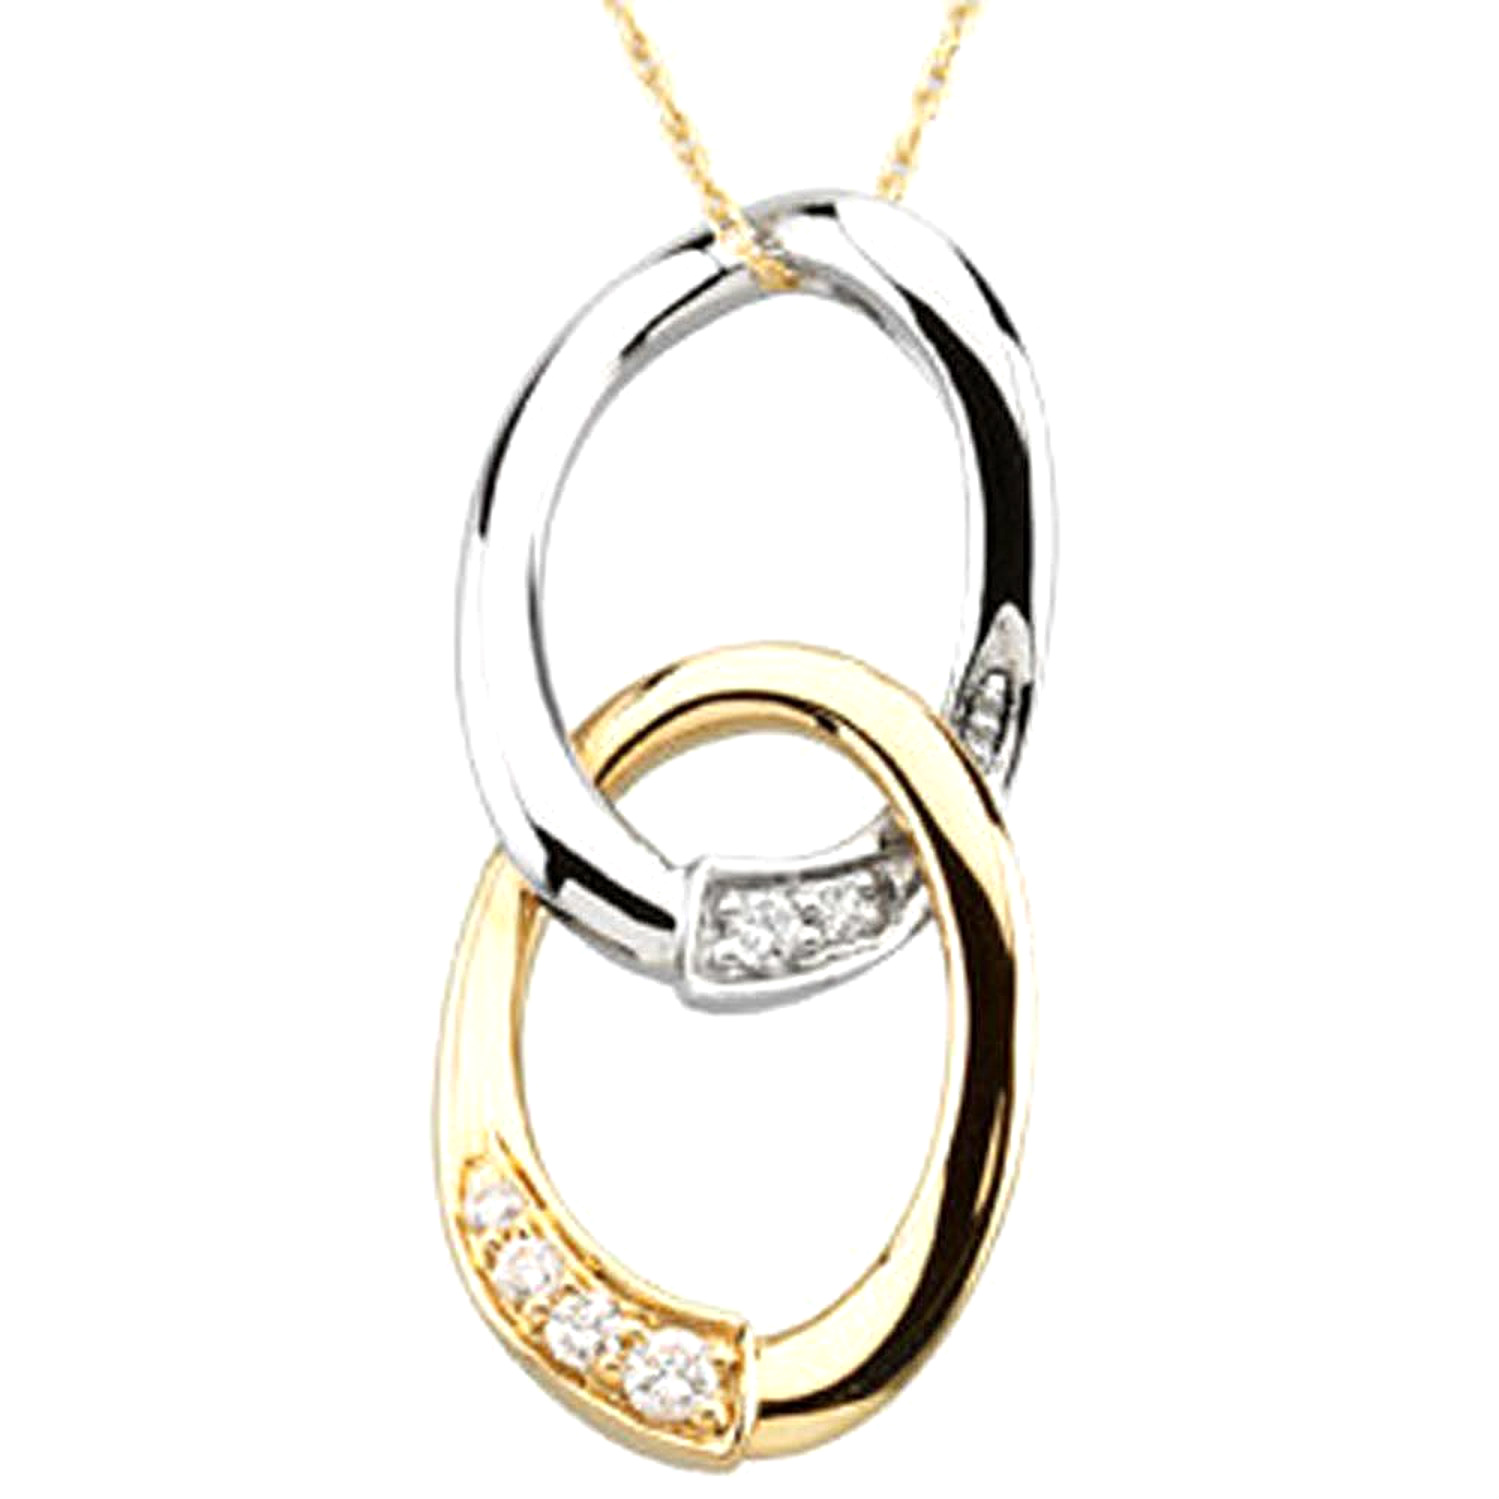 Diamond Two-Circle 14k Yellow and White Gold 'Journey of Marriage' Necklace, 18".